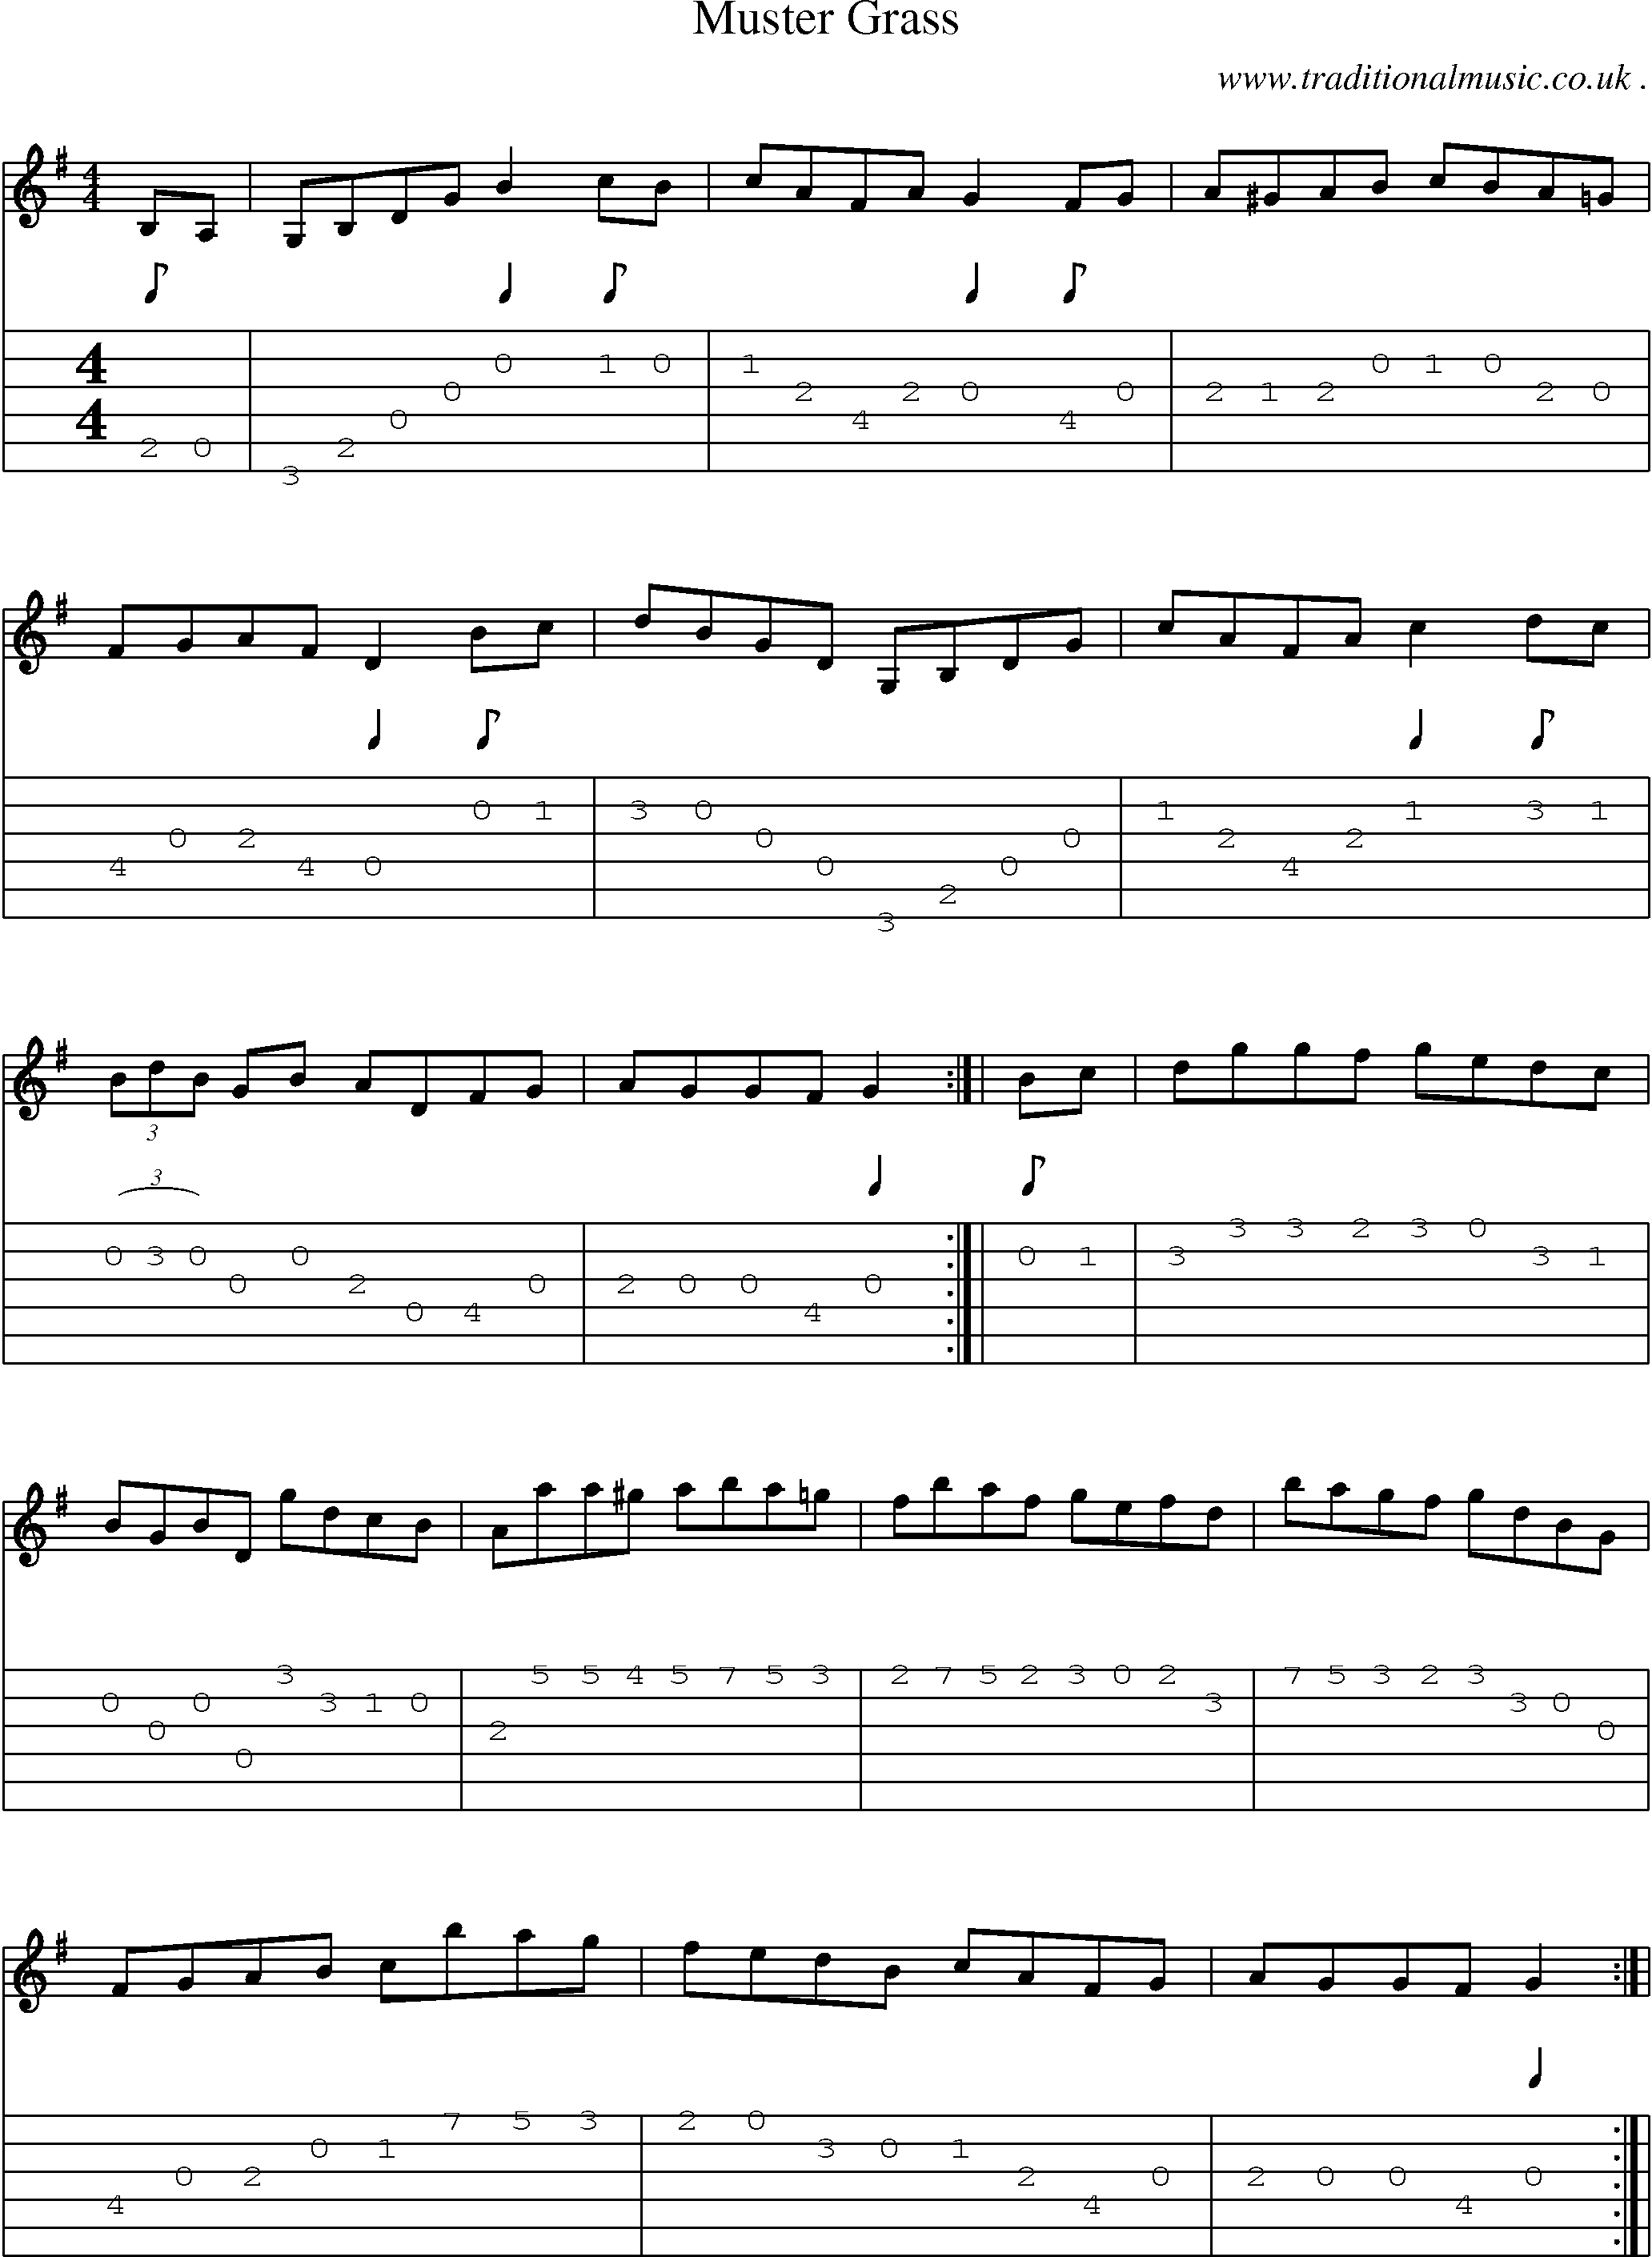 Sheet-Music and Guitar Tabs for Muster Grass